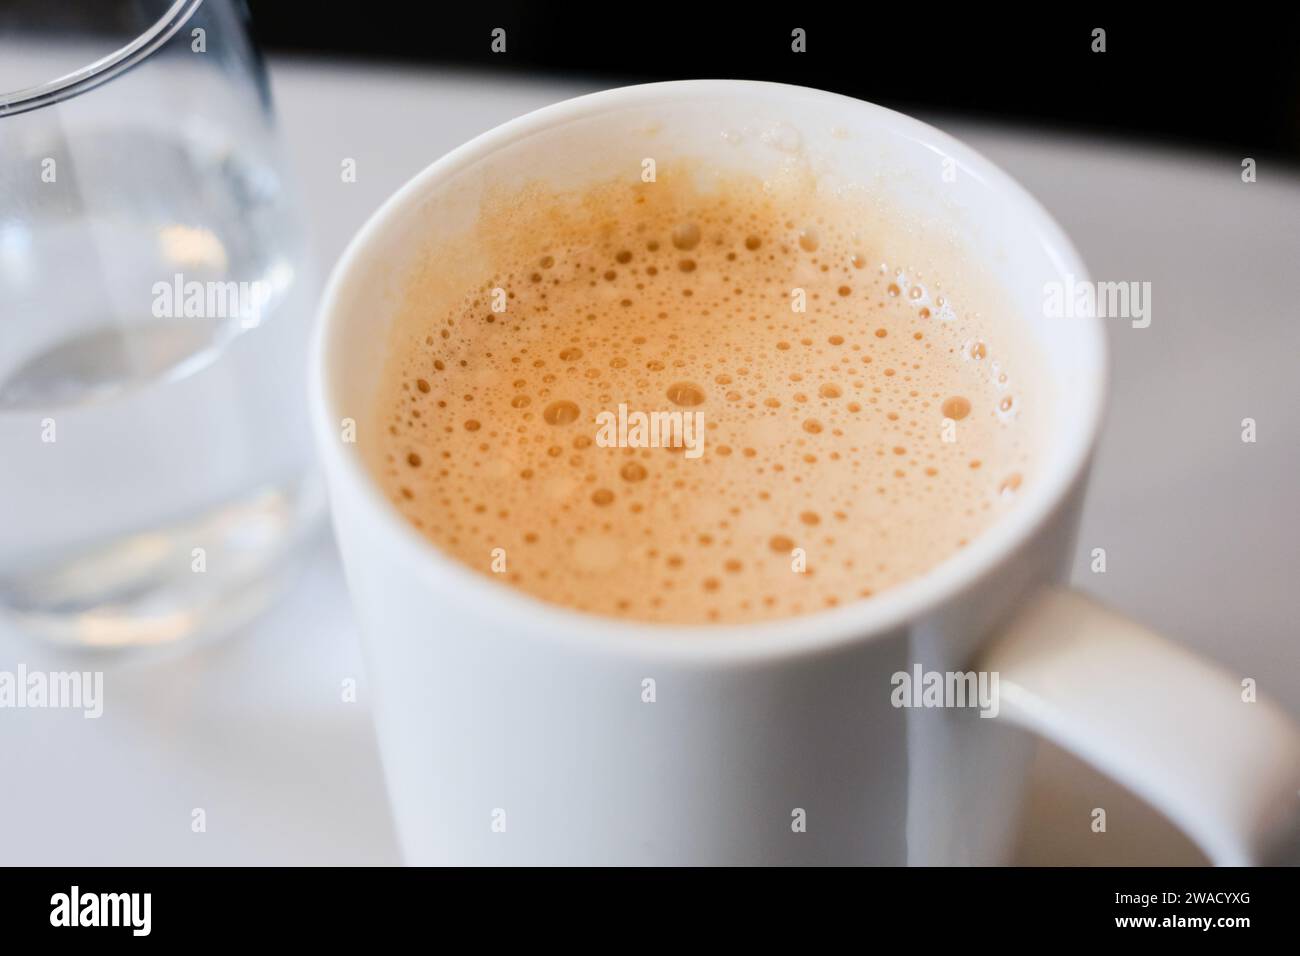 A mug of teh tarik (Malaysian pulled tea with evaporated or condensed milk), served on a business class en route to Kuala Lumpur from Sydney Stock Photo